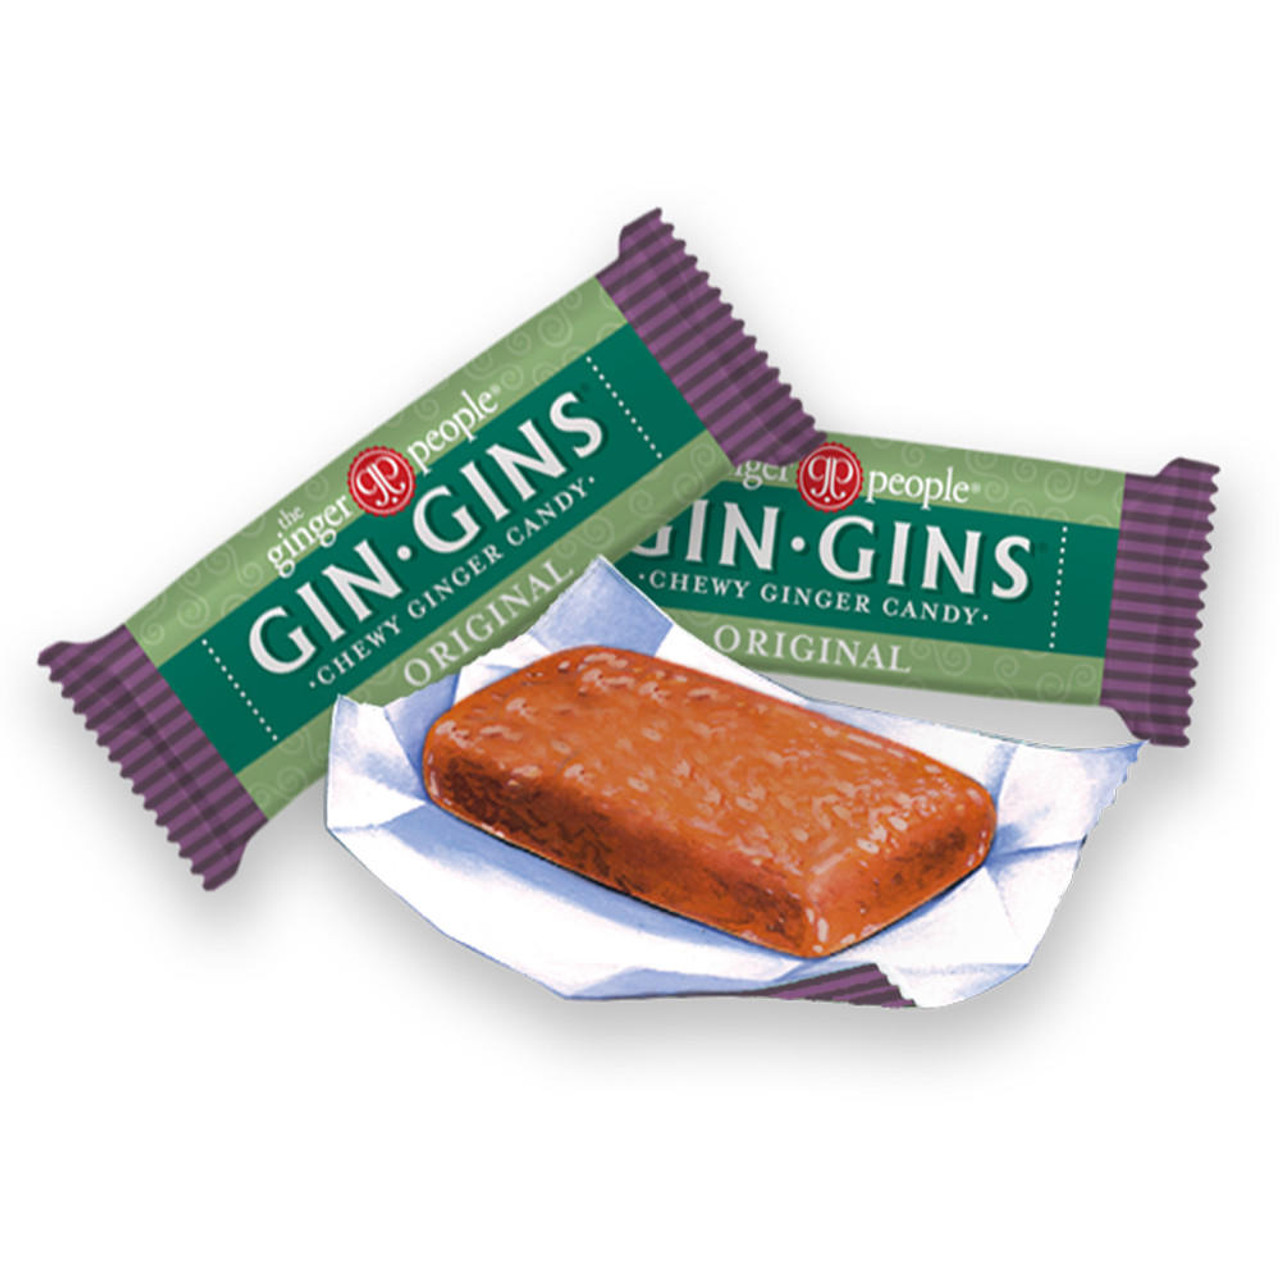 The Ginger People Gin Gins Original Ginger Chews 60g